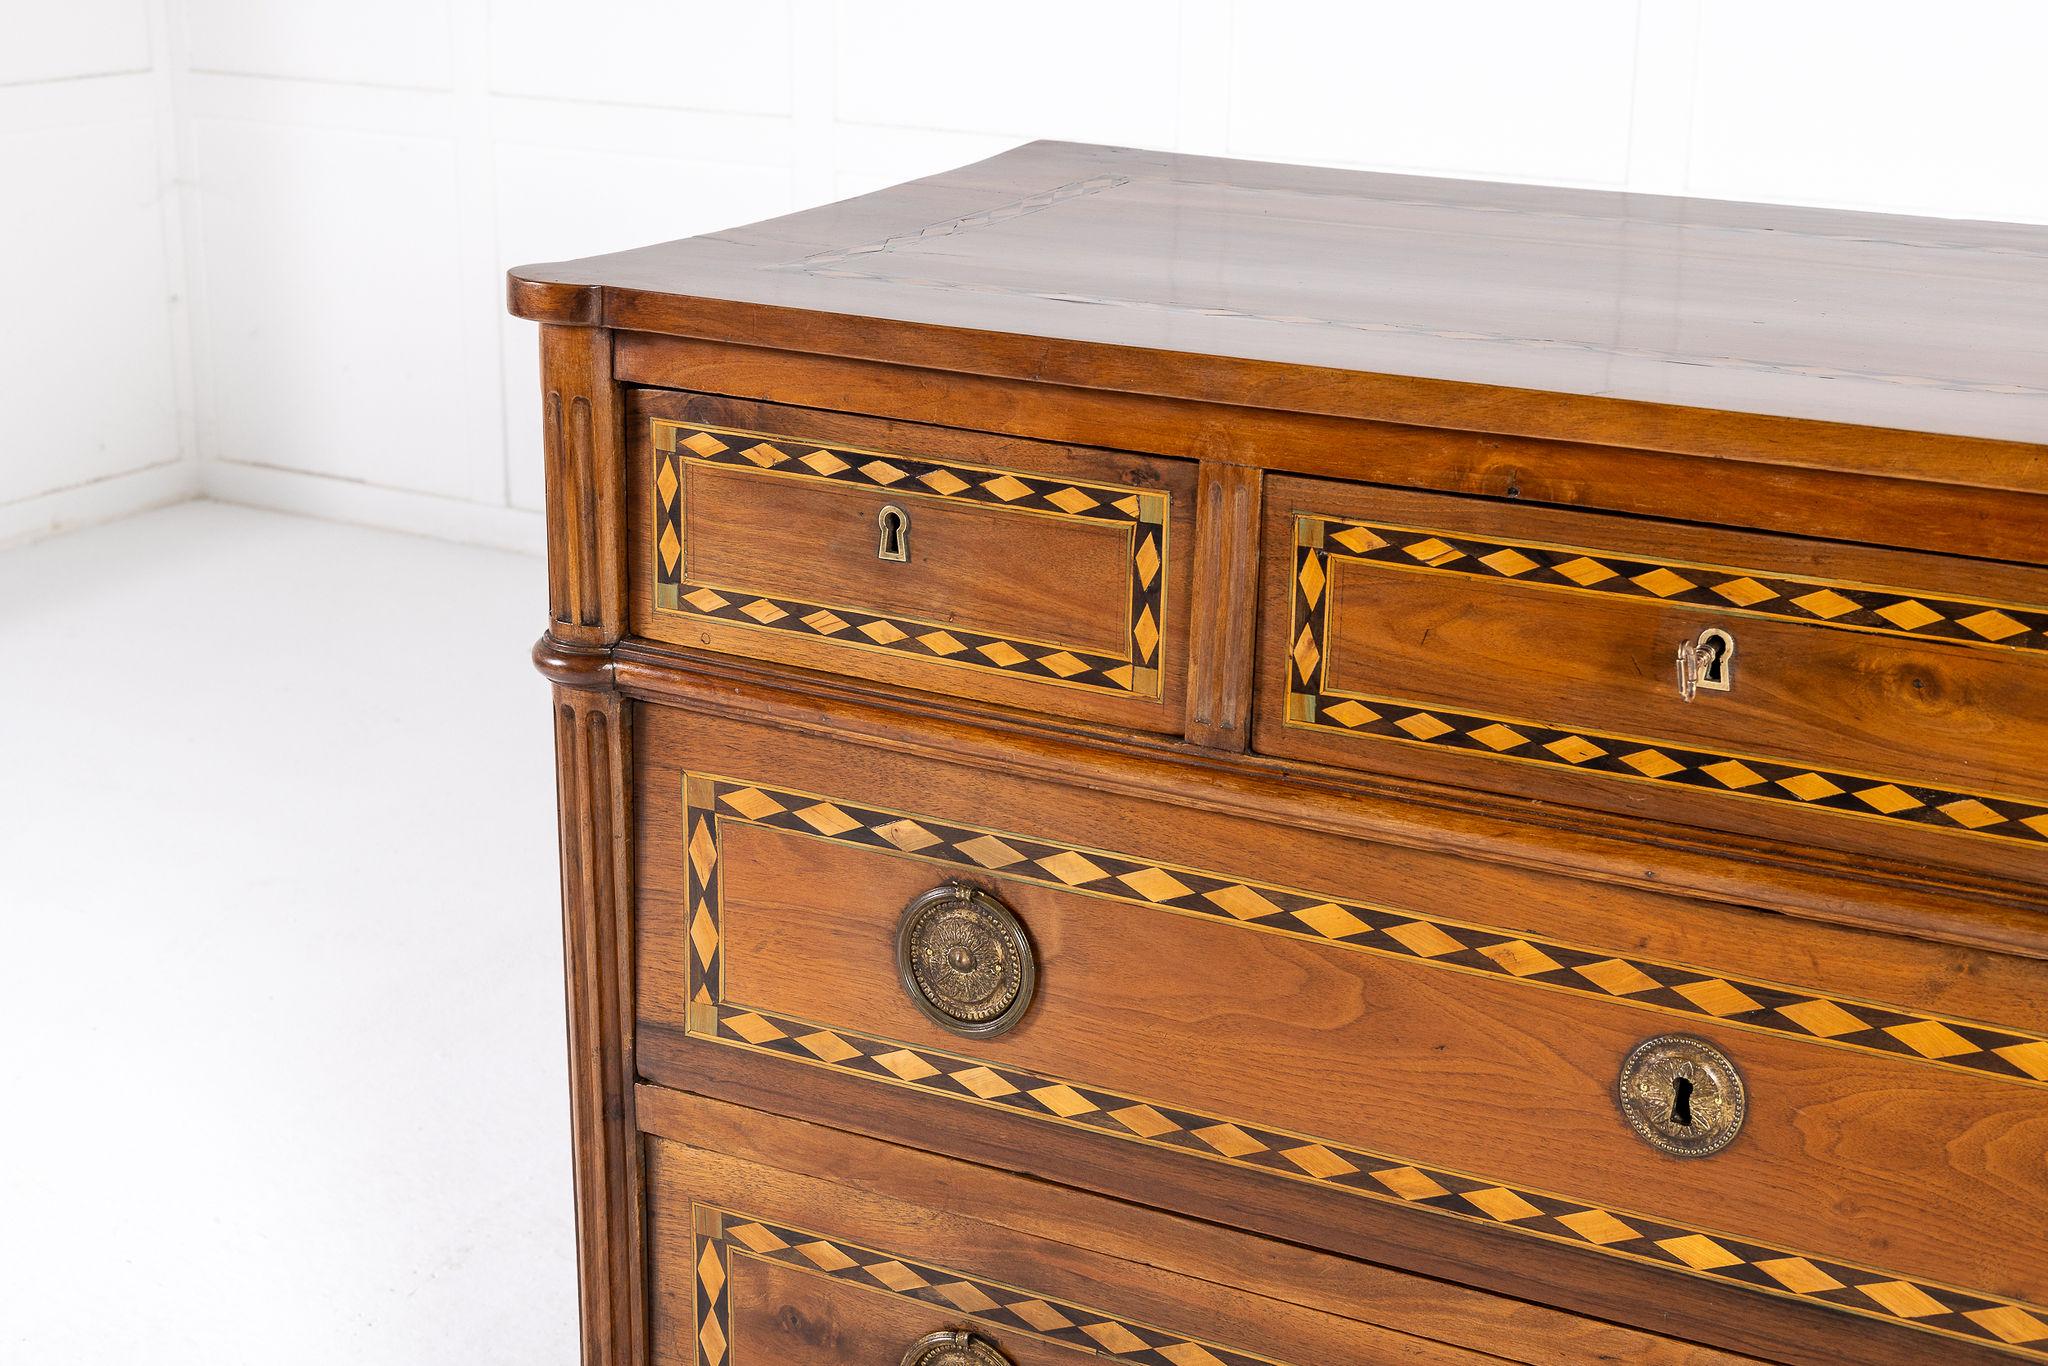 A Fine Late 18th Century French Inlaid Walnut Commode or Large Chest of Drawers with Secret Drawer.

Of high Louis XVI neoclassical form, this commode features a versatile combination of three small upper drawers, and one concealed secret drawer